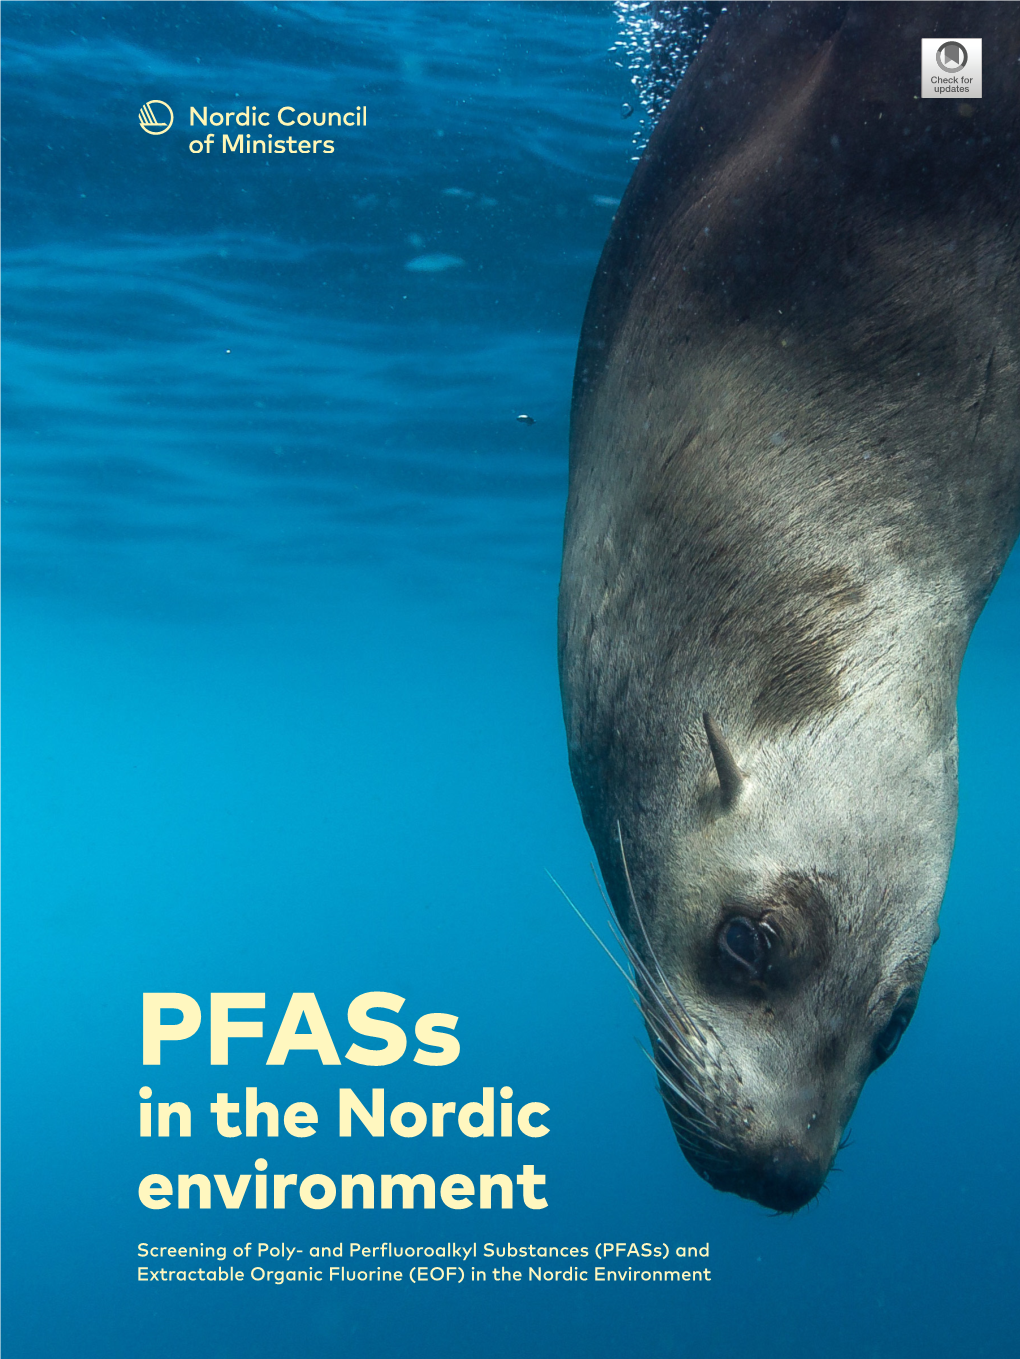 Pfass in the Nordic Environment Screening of Poly- and Perfluoroalkyl Substances (Pfass) and Extractable Organic Fluorine (EOF) in the Nordic Environment